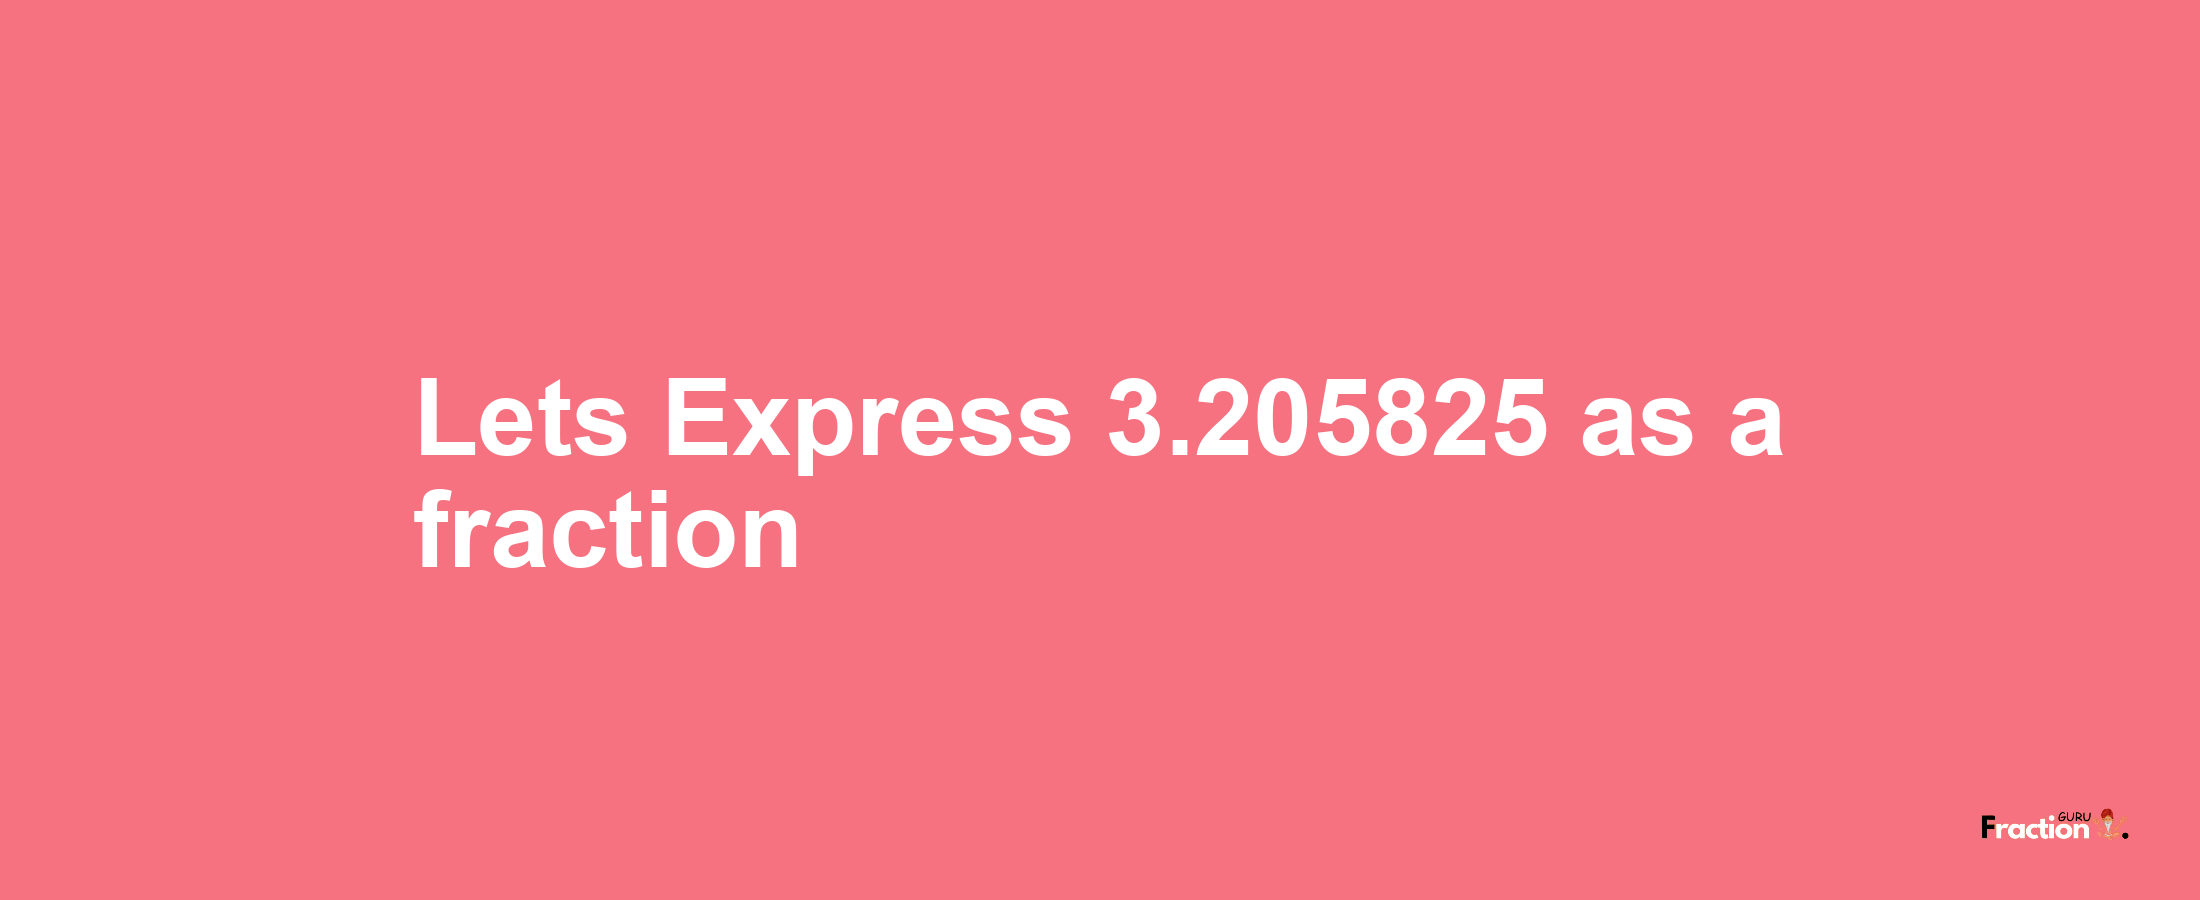 Lets Express 3.205825 as afraction